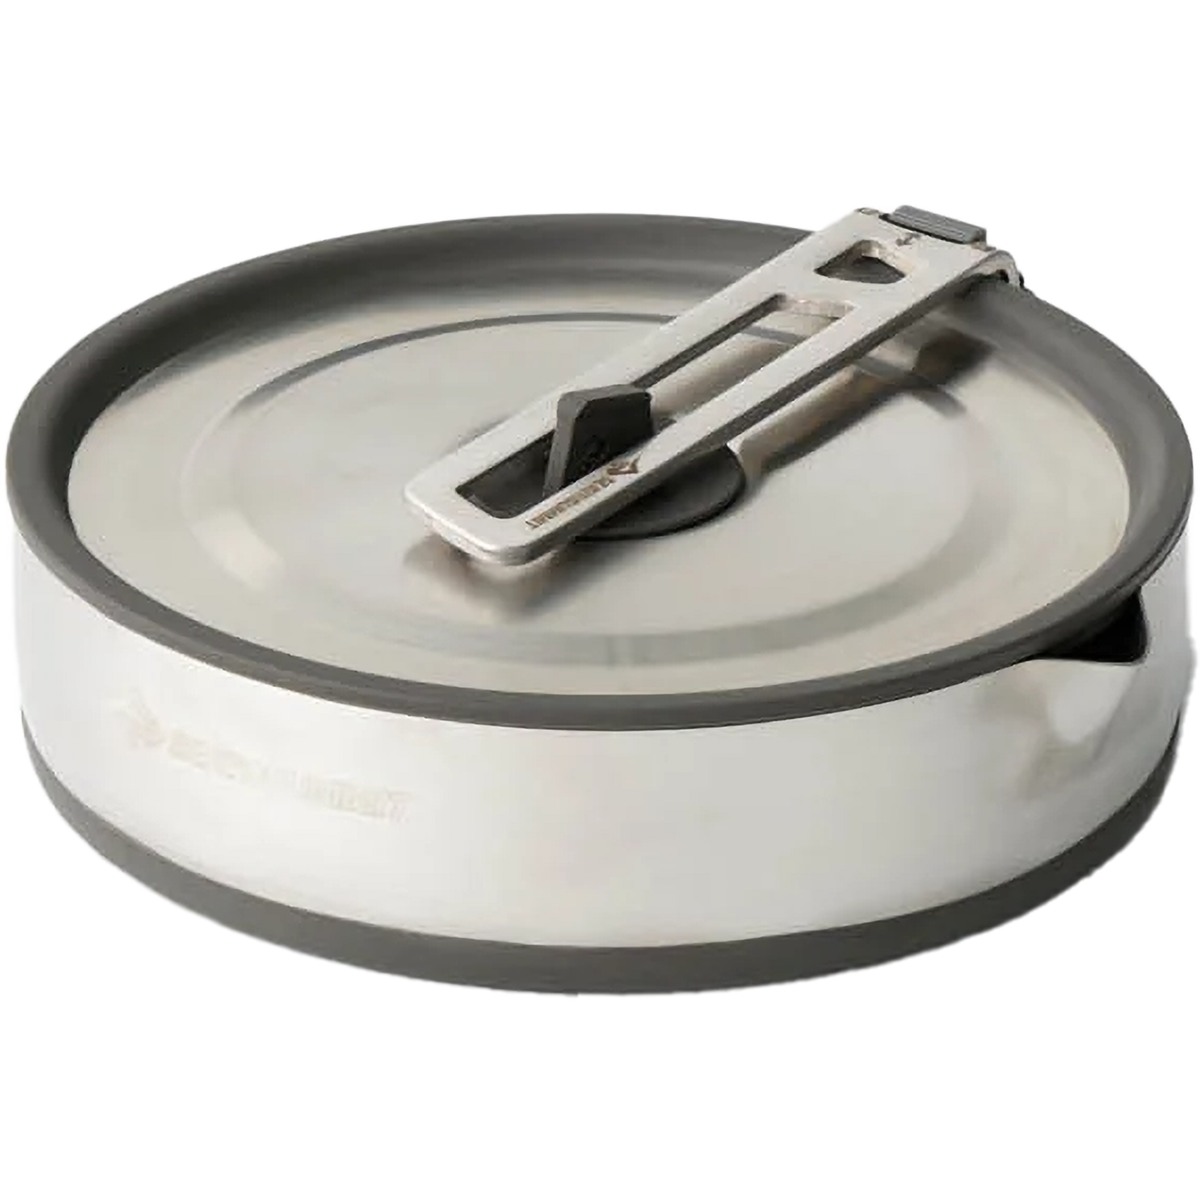 Detour Stainless Collapsible Pot 1.8 L alternate view